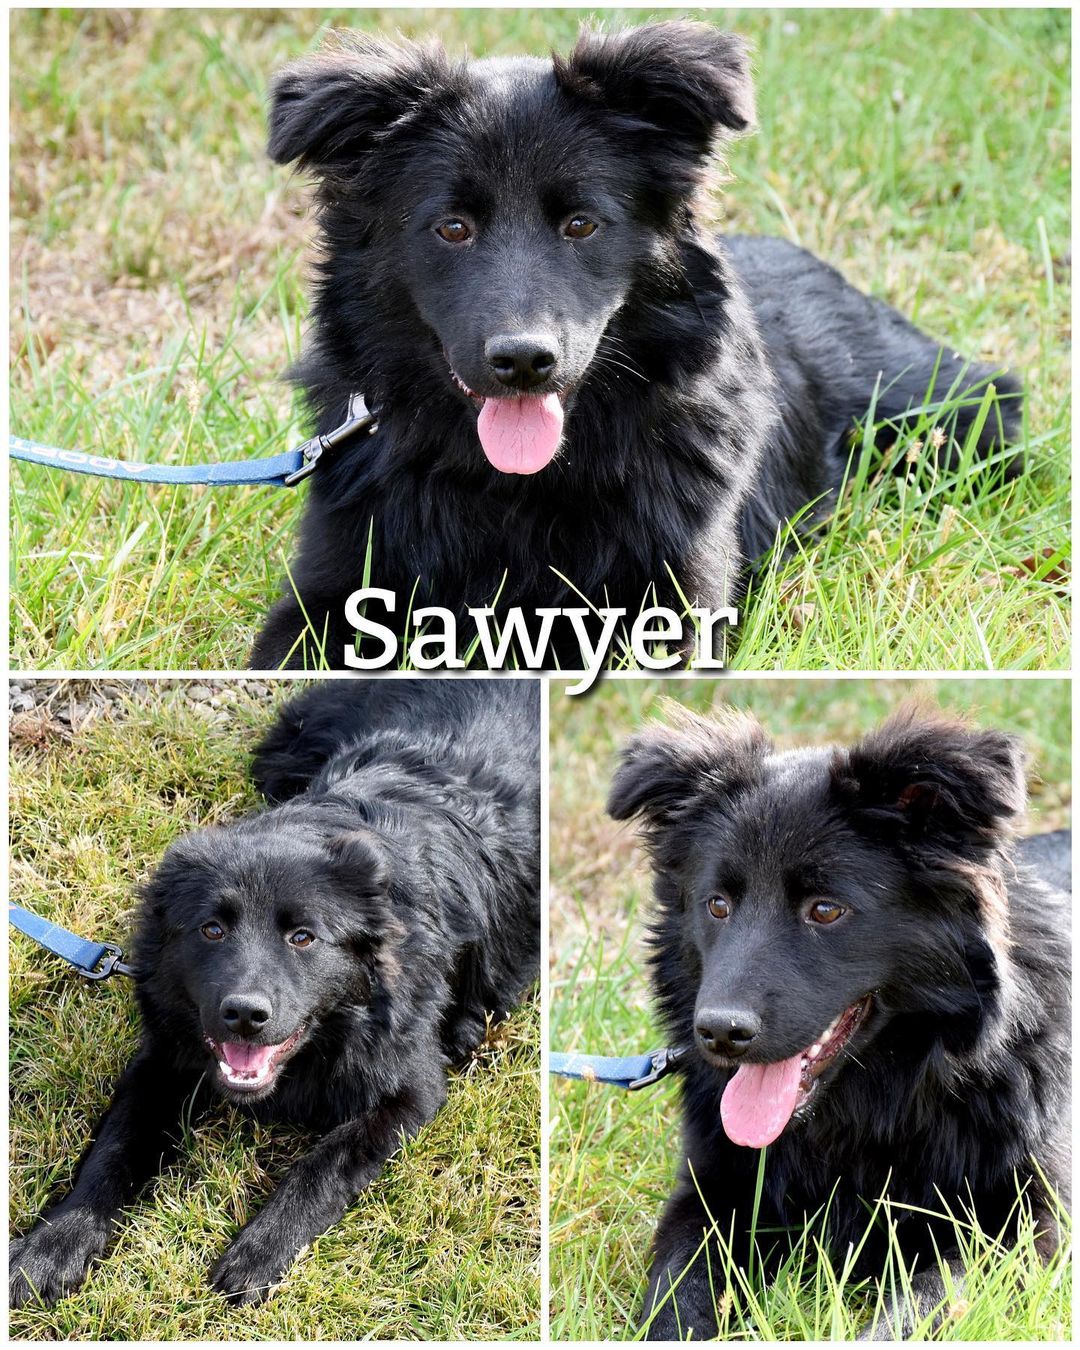 Update: Adopted
Meet Sawyer!
Sawyer is a sweet, silly, and timid 4 month old Border Collie mix puppy looking for his forever home! He loves to get belly rubs, play with toys, and be loved on by everyone he meets. Sawyer is ready to go home and hopes to meet his forever family soon!

Sawyer is neutered, up to date on vaccinations, dewormed, and current on flea/tick preventatives. 

Sawyer’s adoption fee is $85, plus $15 for microchip